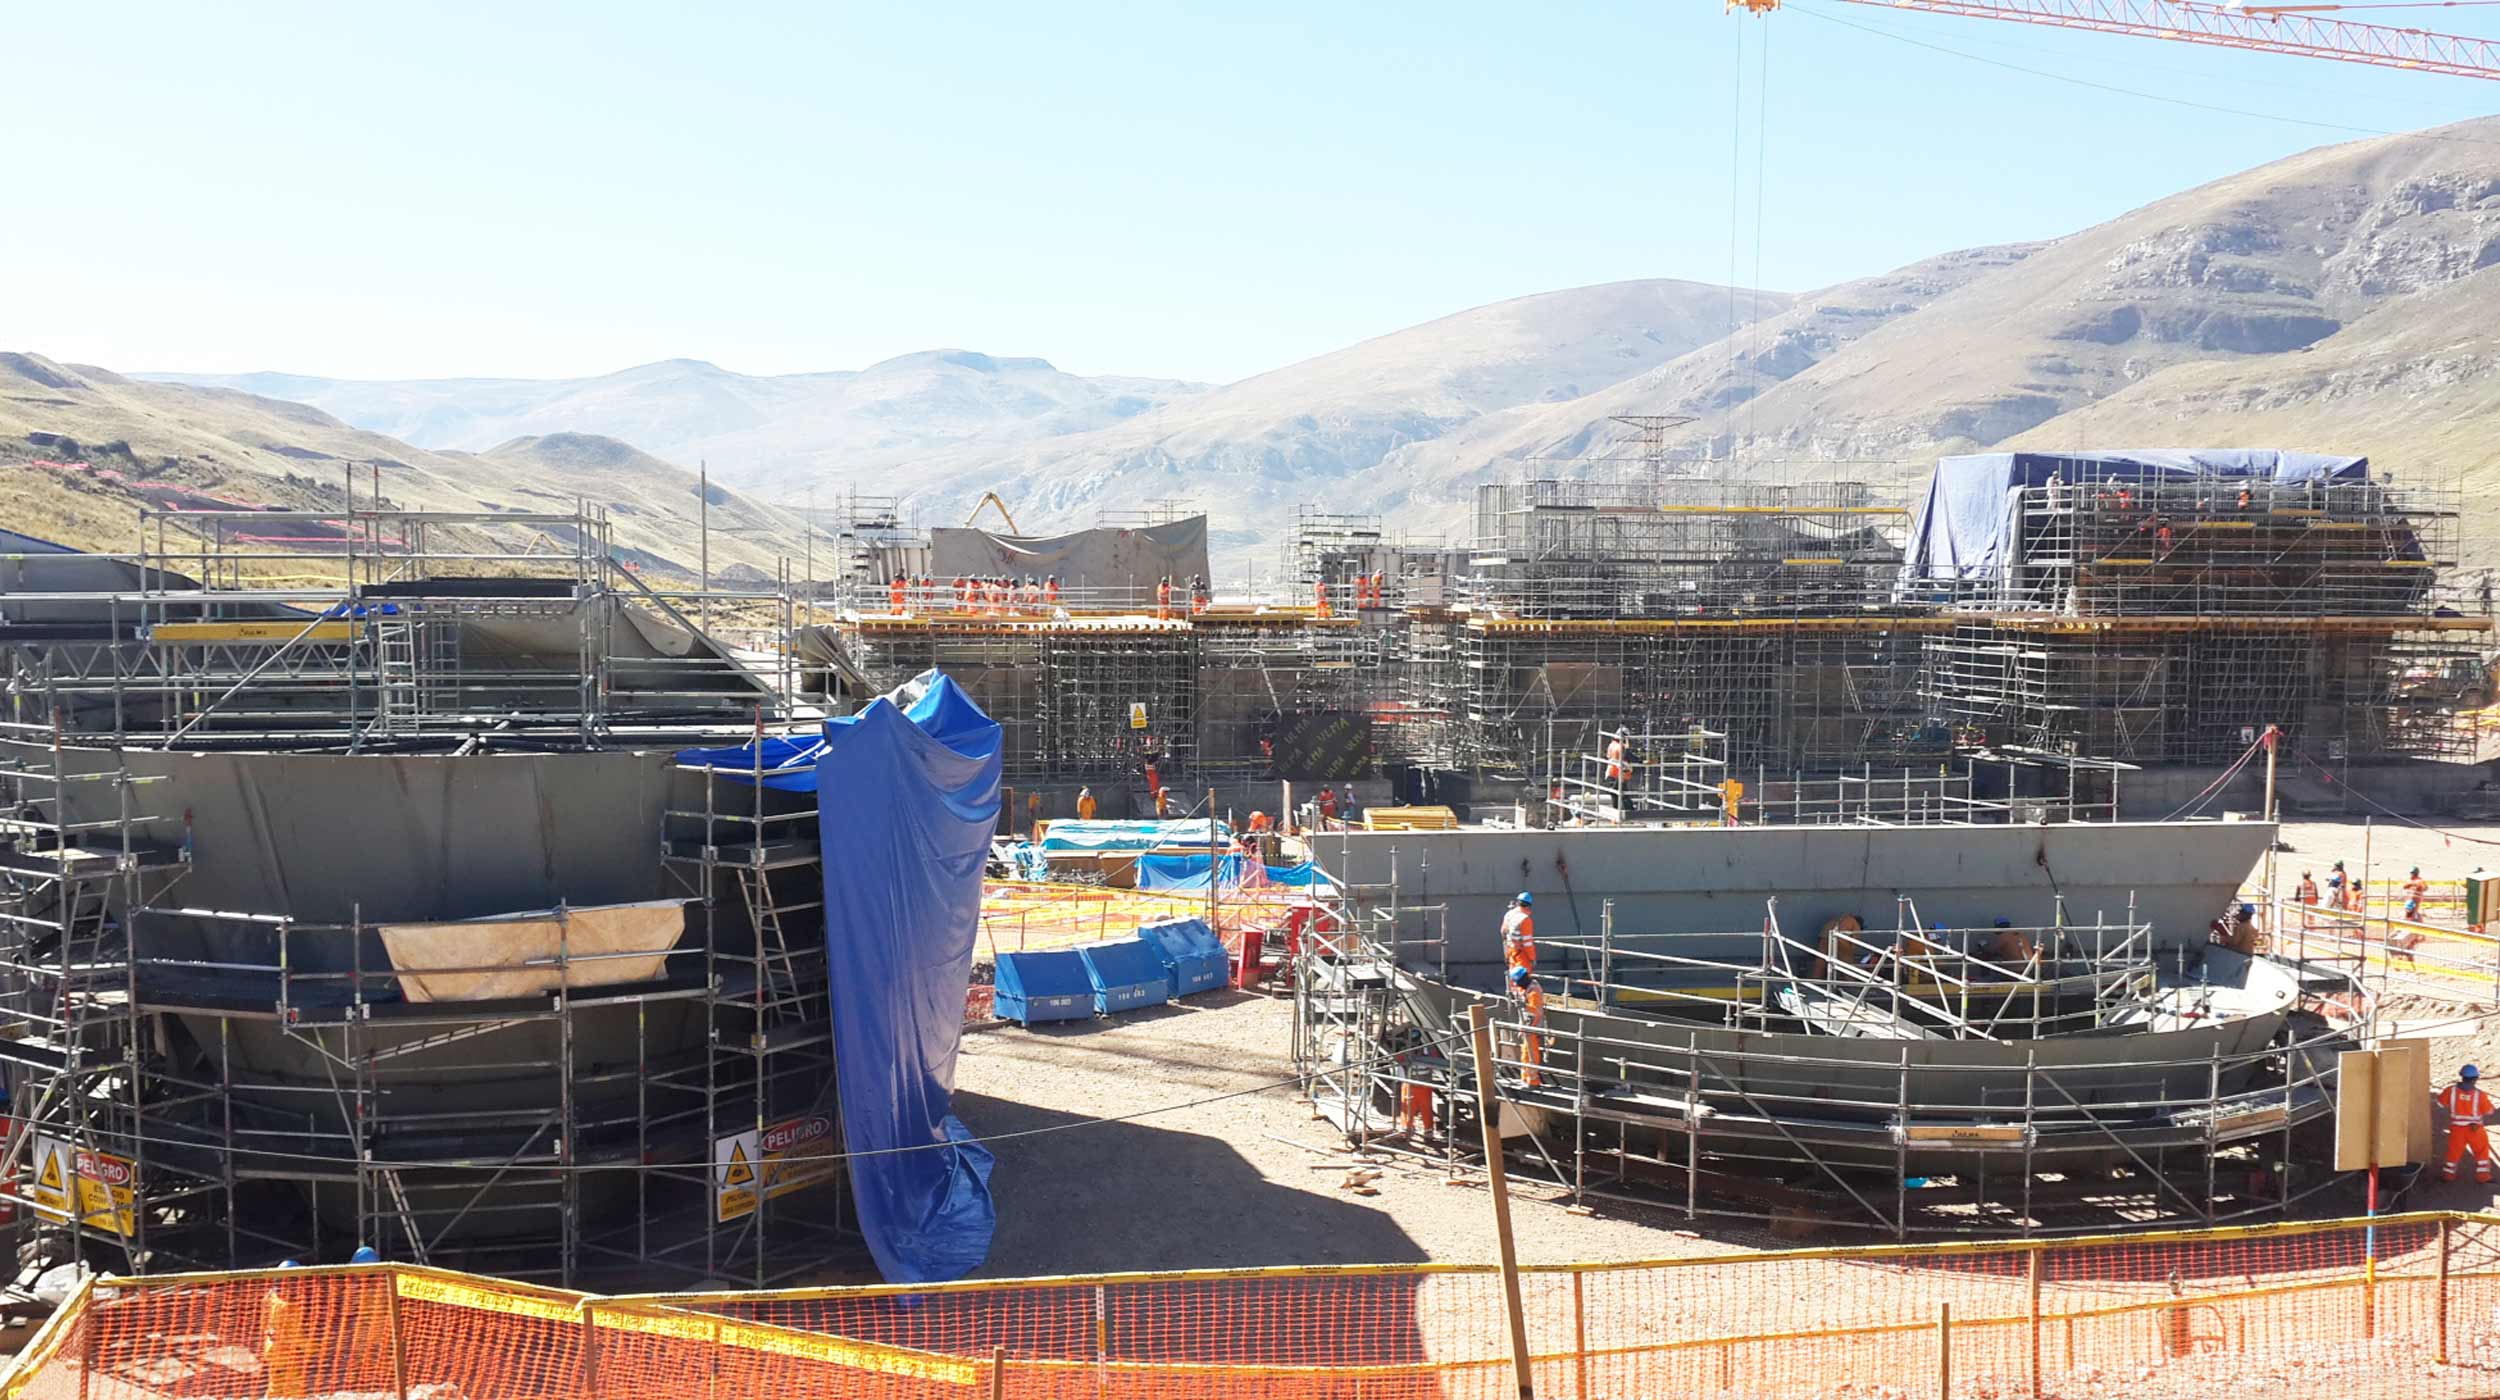 In the face of tight building schedules, adverse weather conditions, and all the difficulties that high altitude work entails, ULMA responded with careful planning and project management paired with high-quality products.